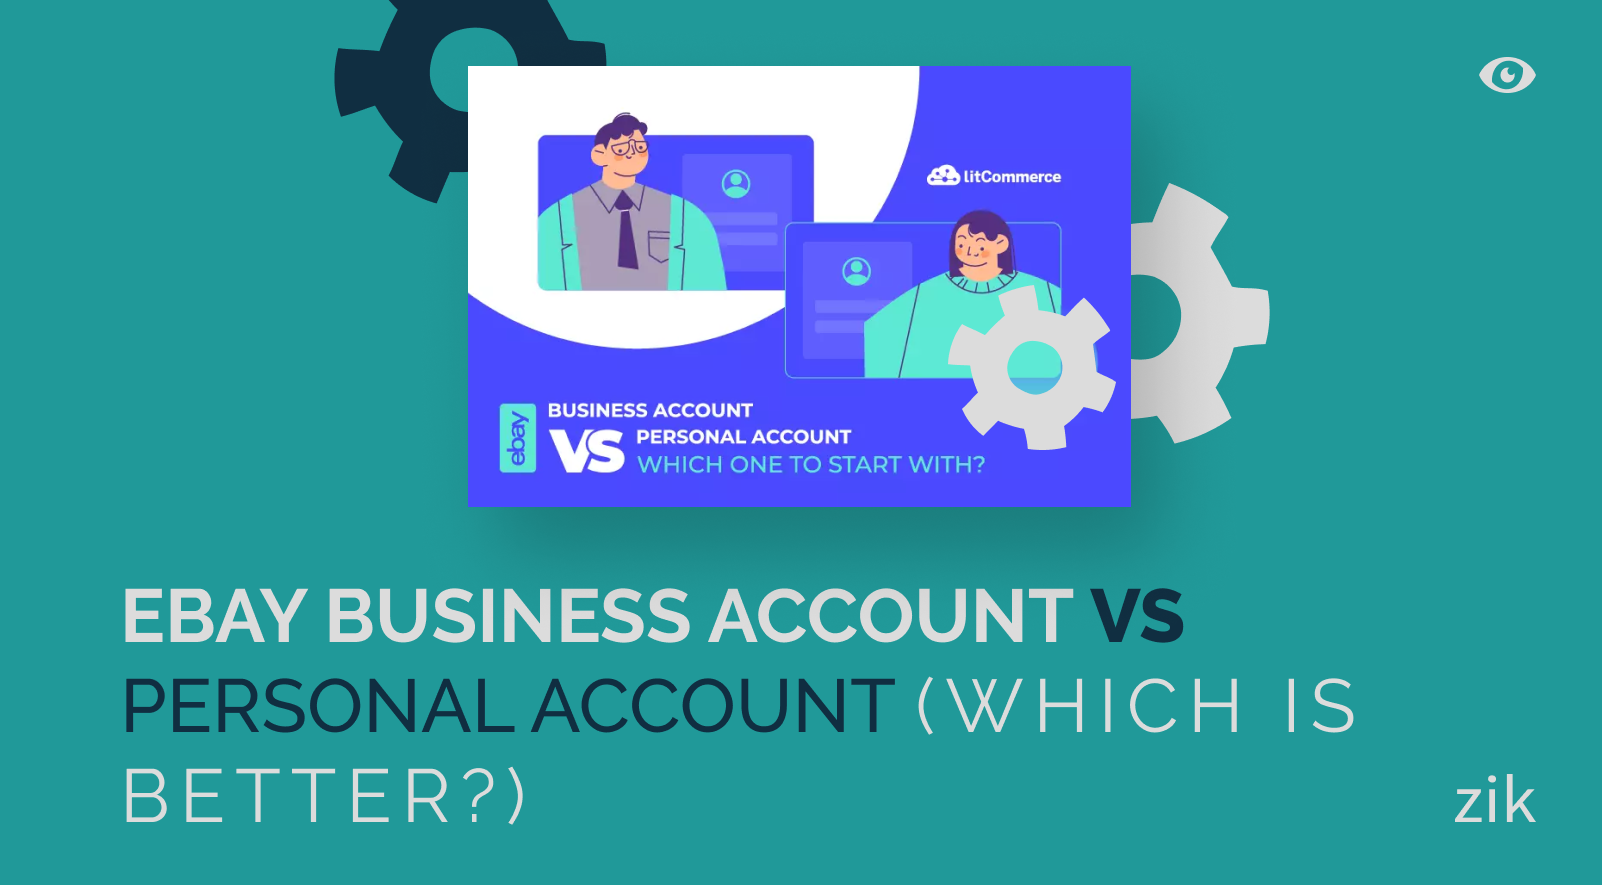 This is about the differences between an eBay business and personal account.